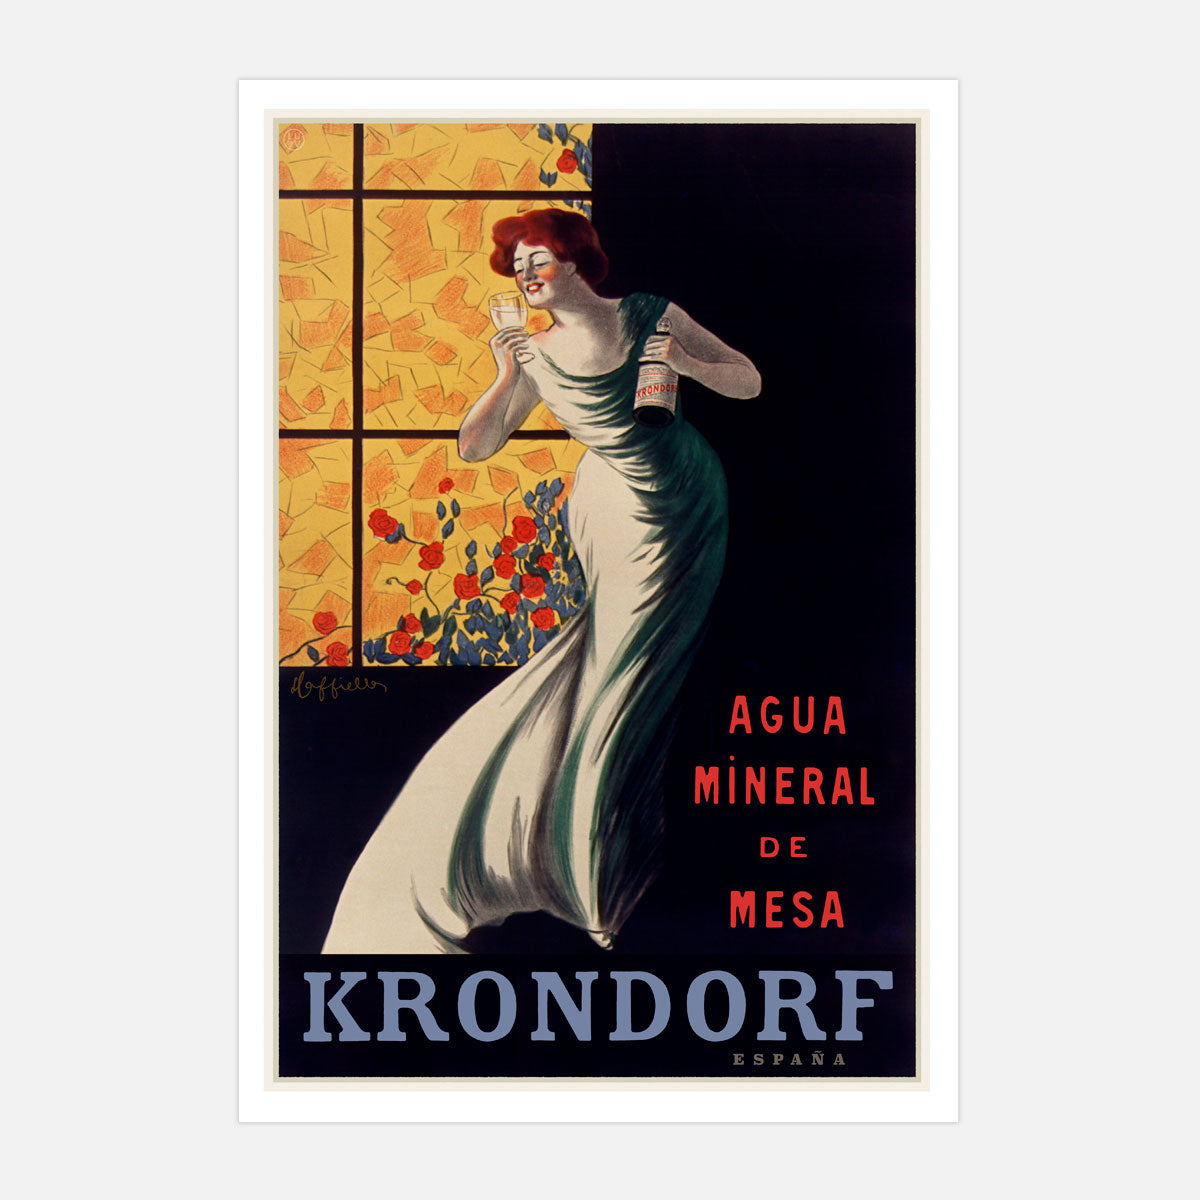 Krondorf retro vintage advertising poster from Places We Luv